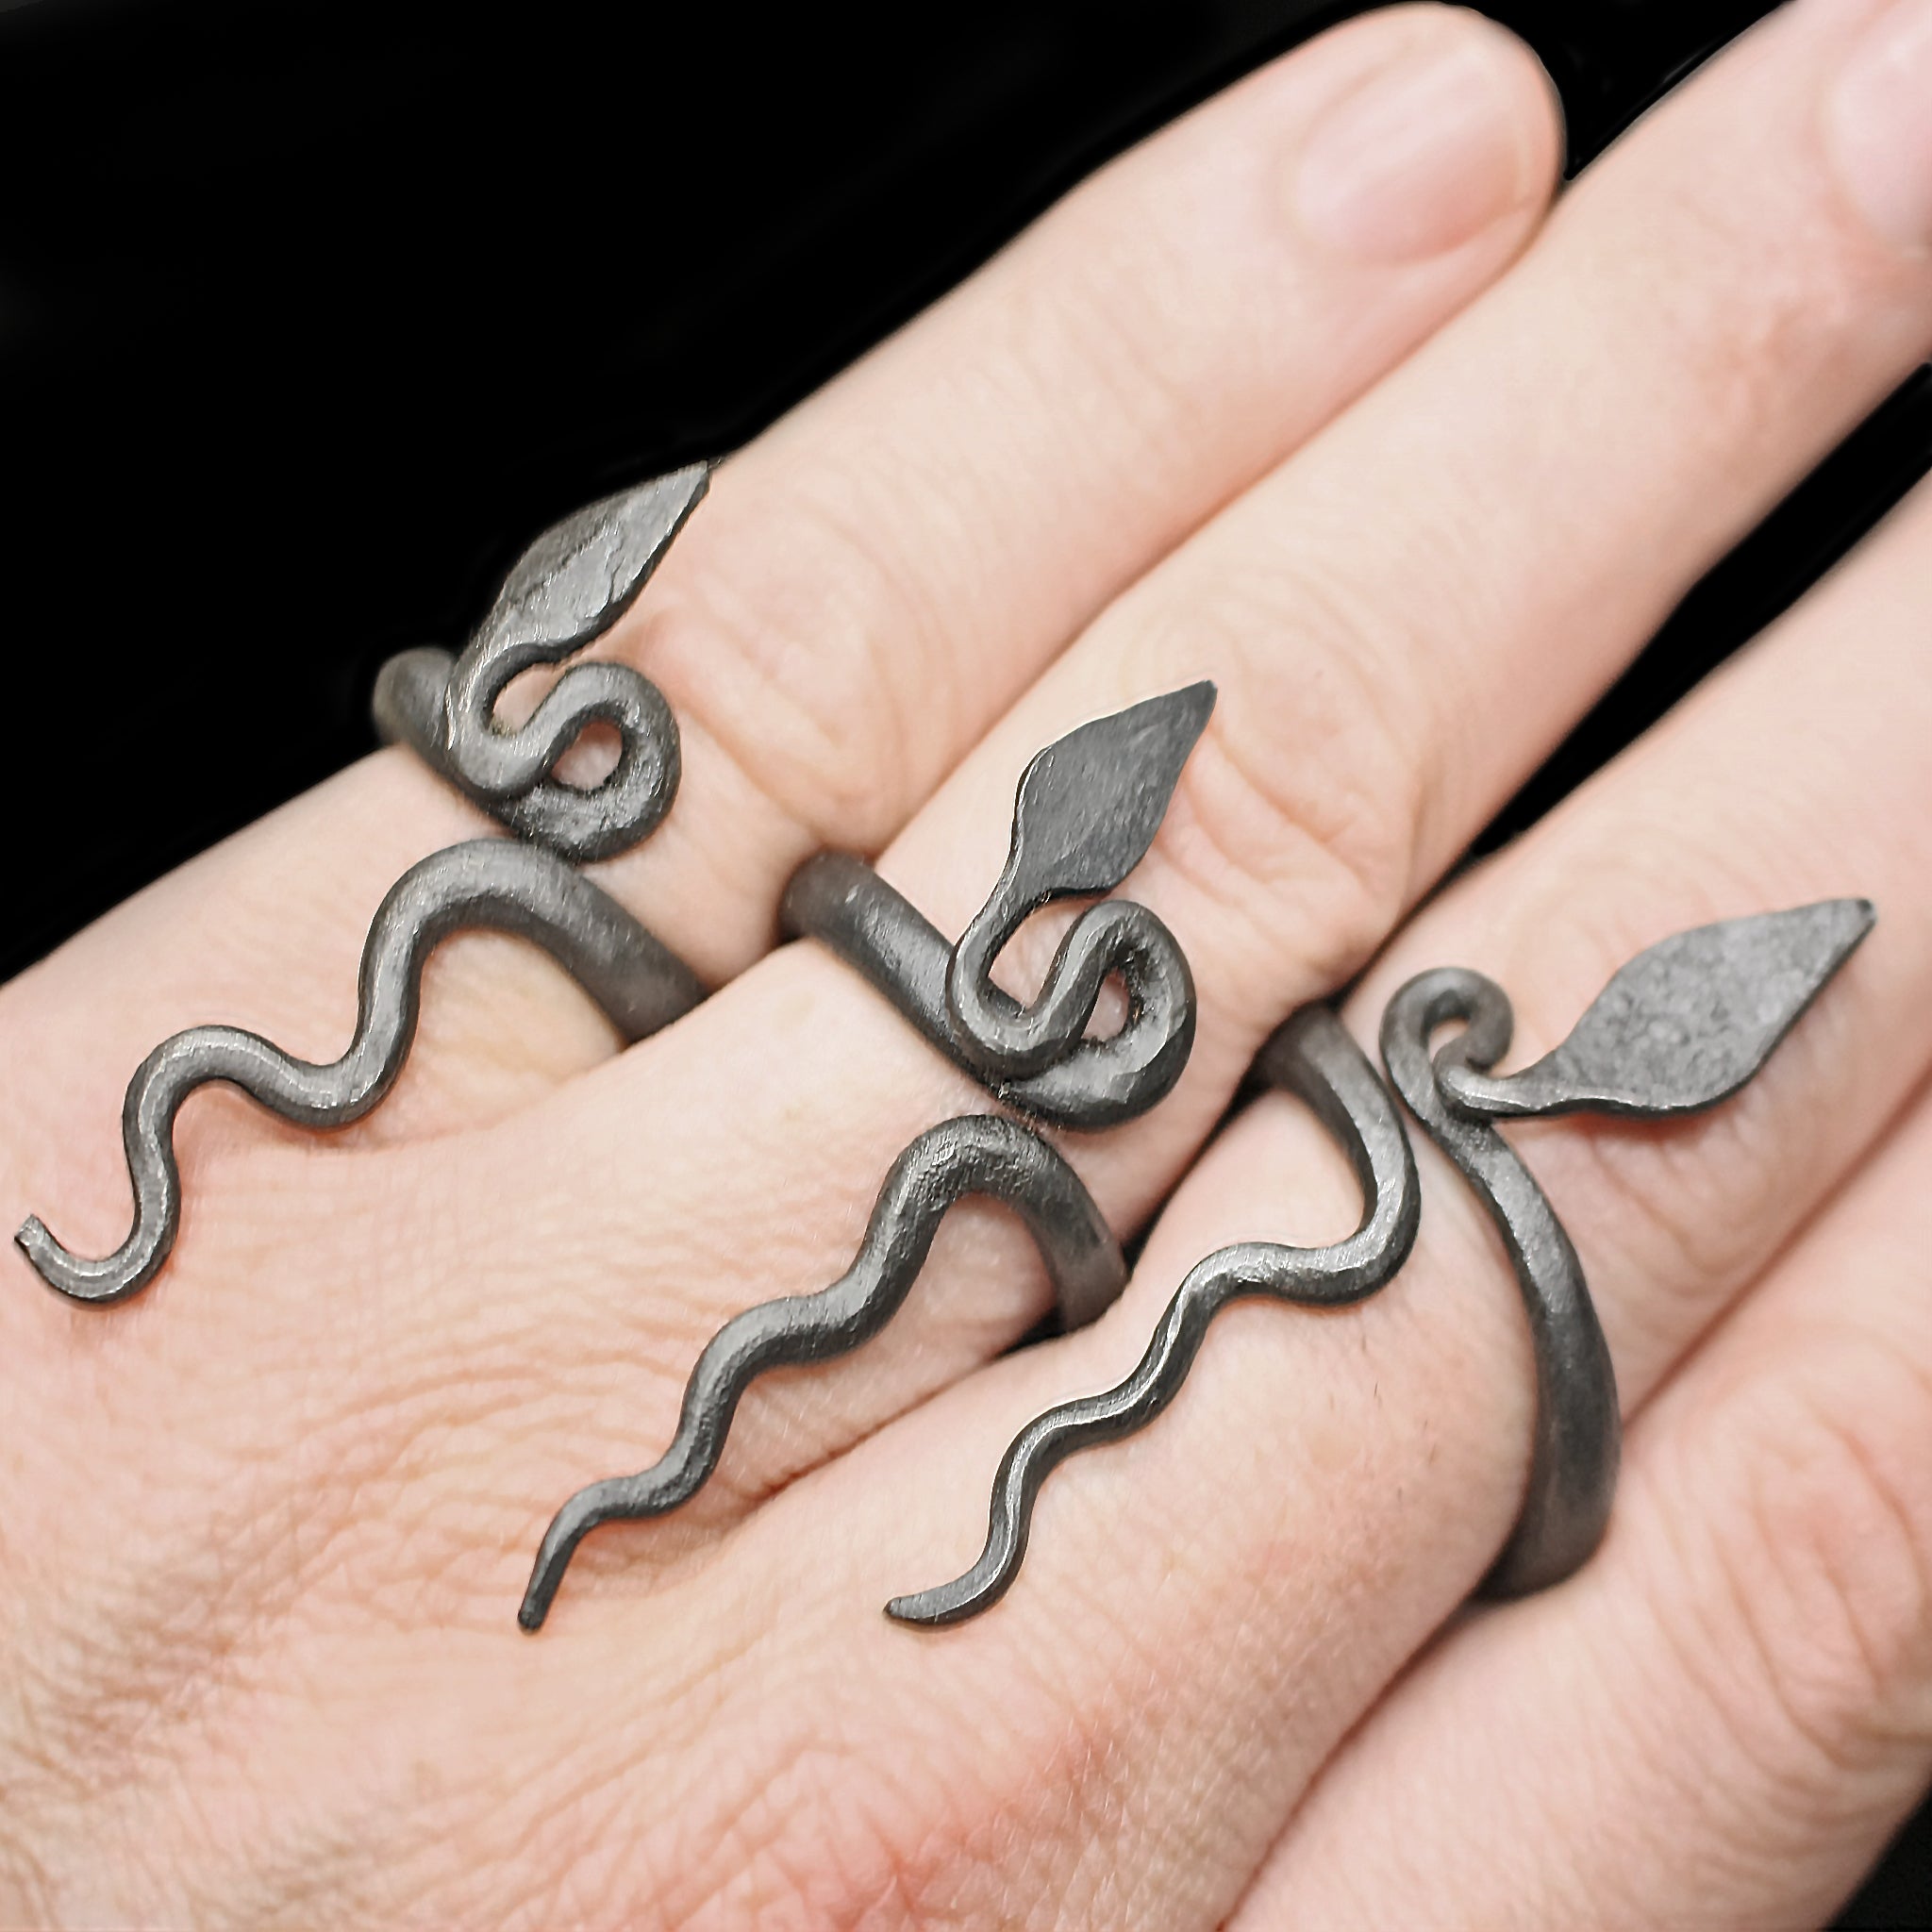 Iron Snake / Serpent Rings on Hand - 3 Sizes